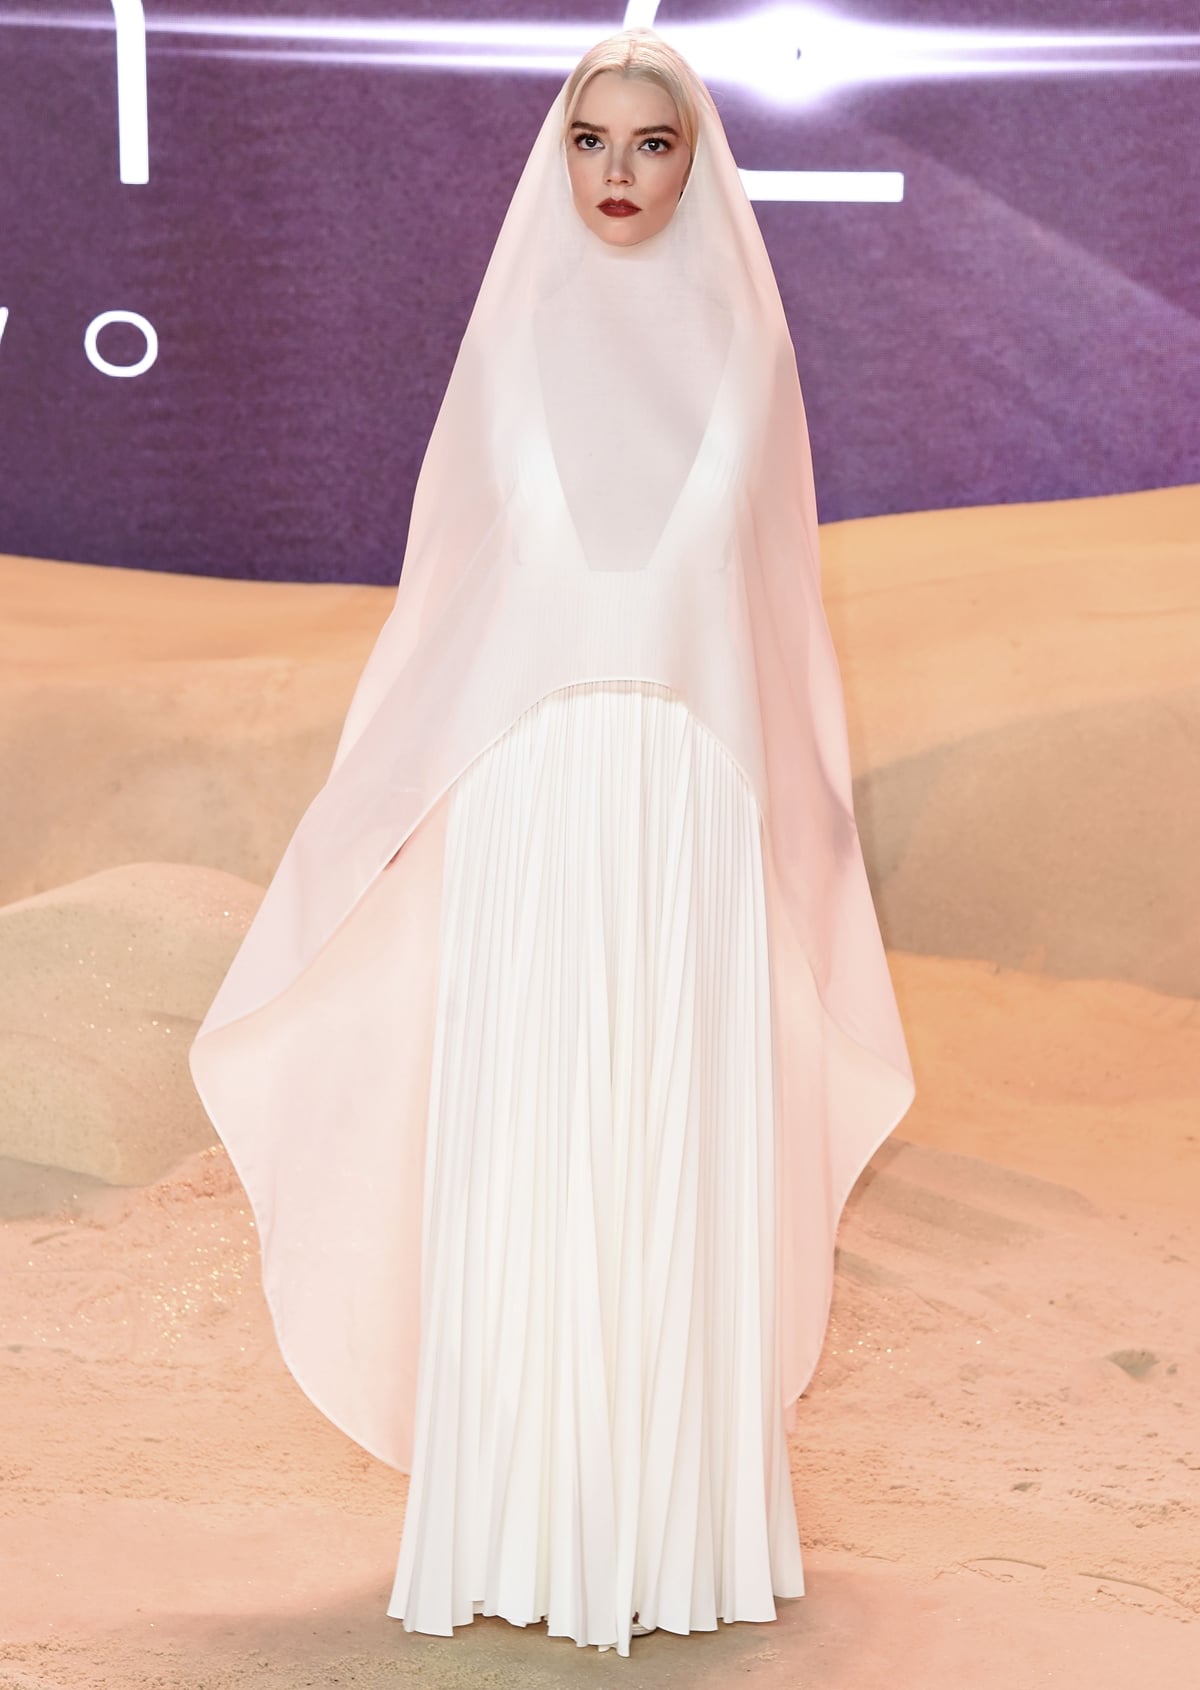 Anya Taylor-Joy strikes a pose in a vintage-inspired Christian Dior Haute Couture gown featuring a daring square neckline and a translucent white hooded cape framing her face